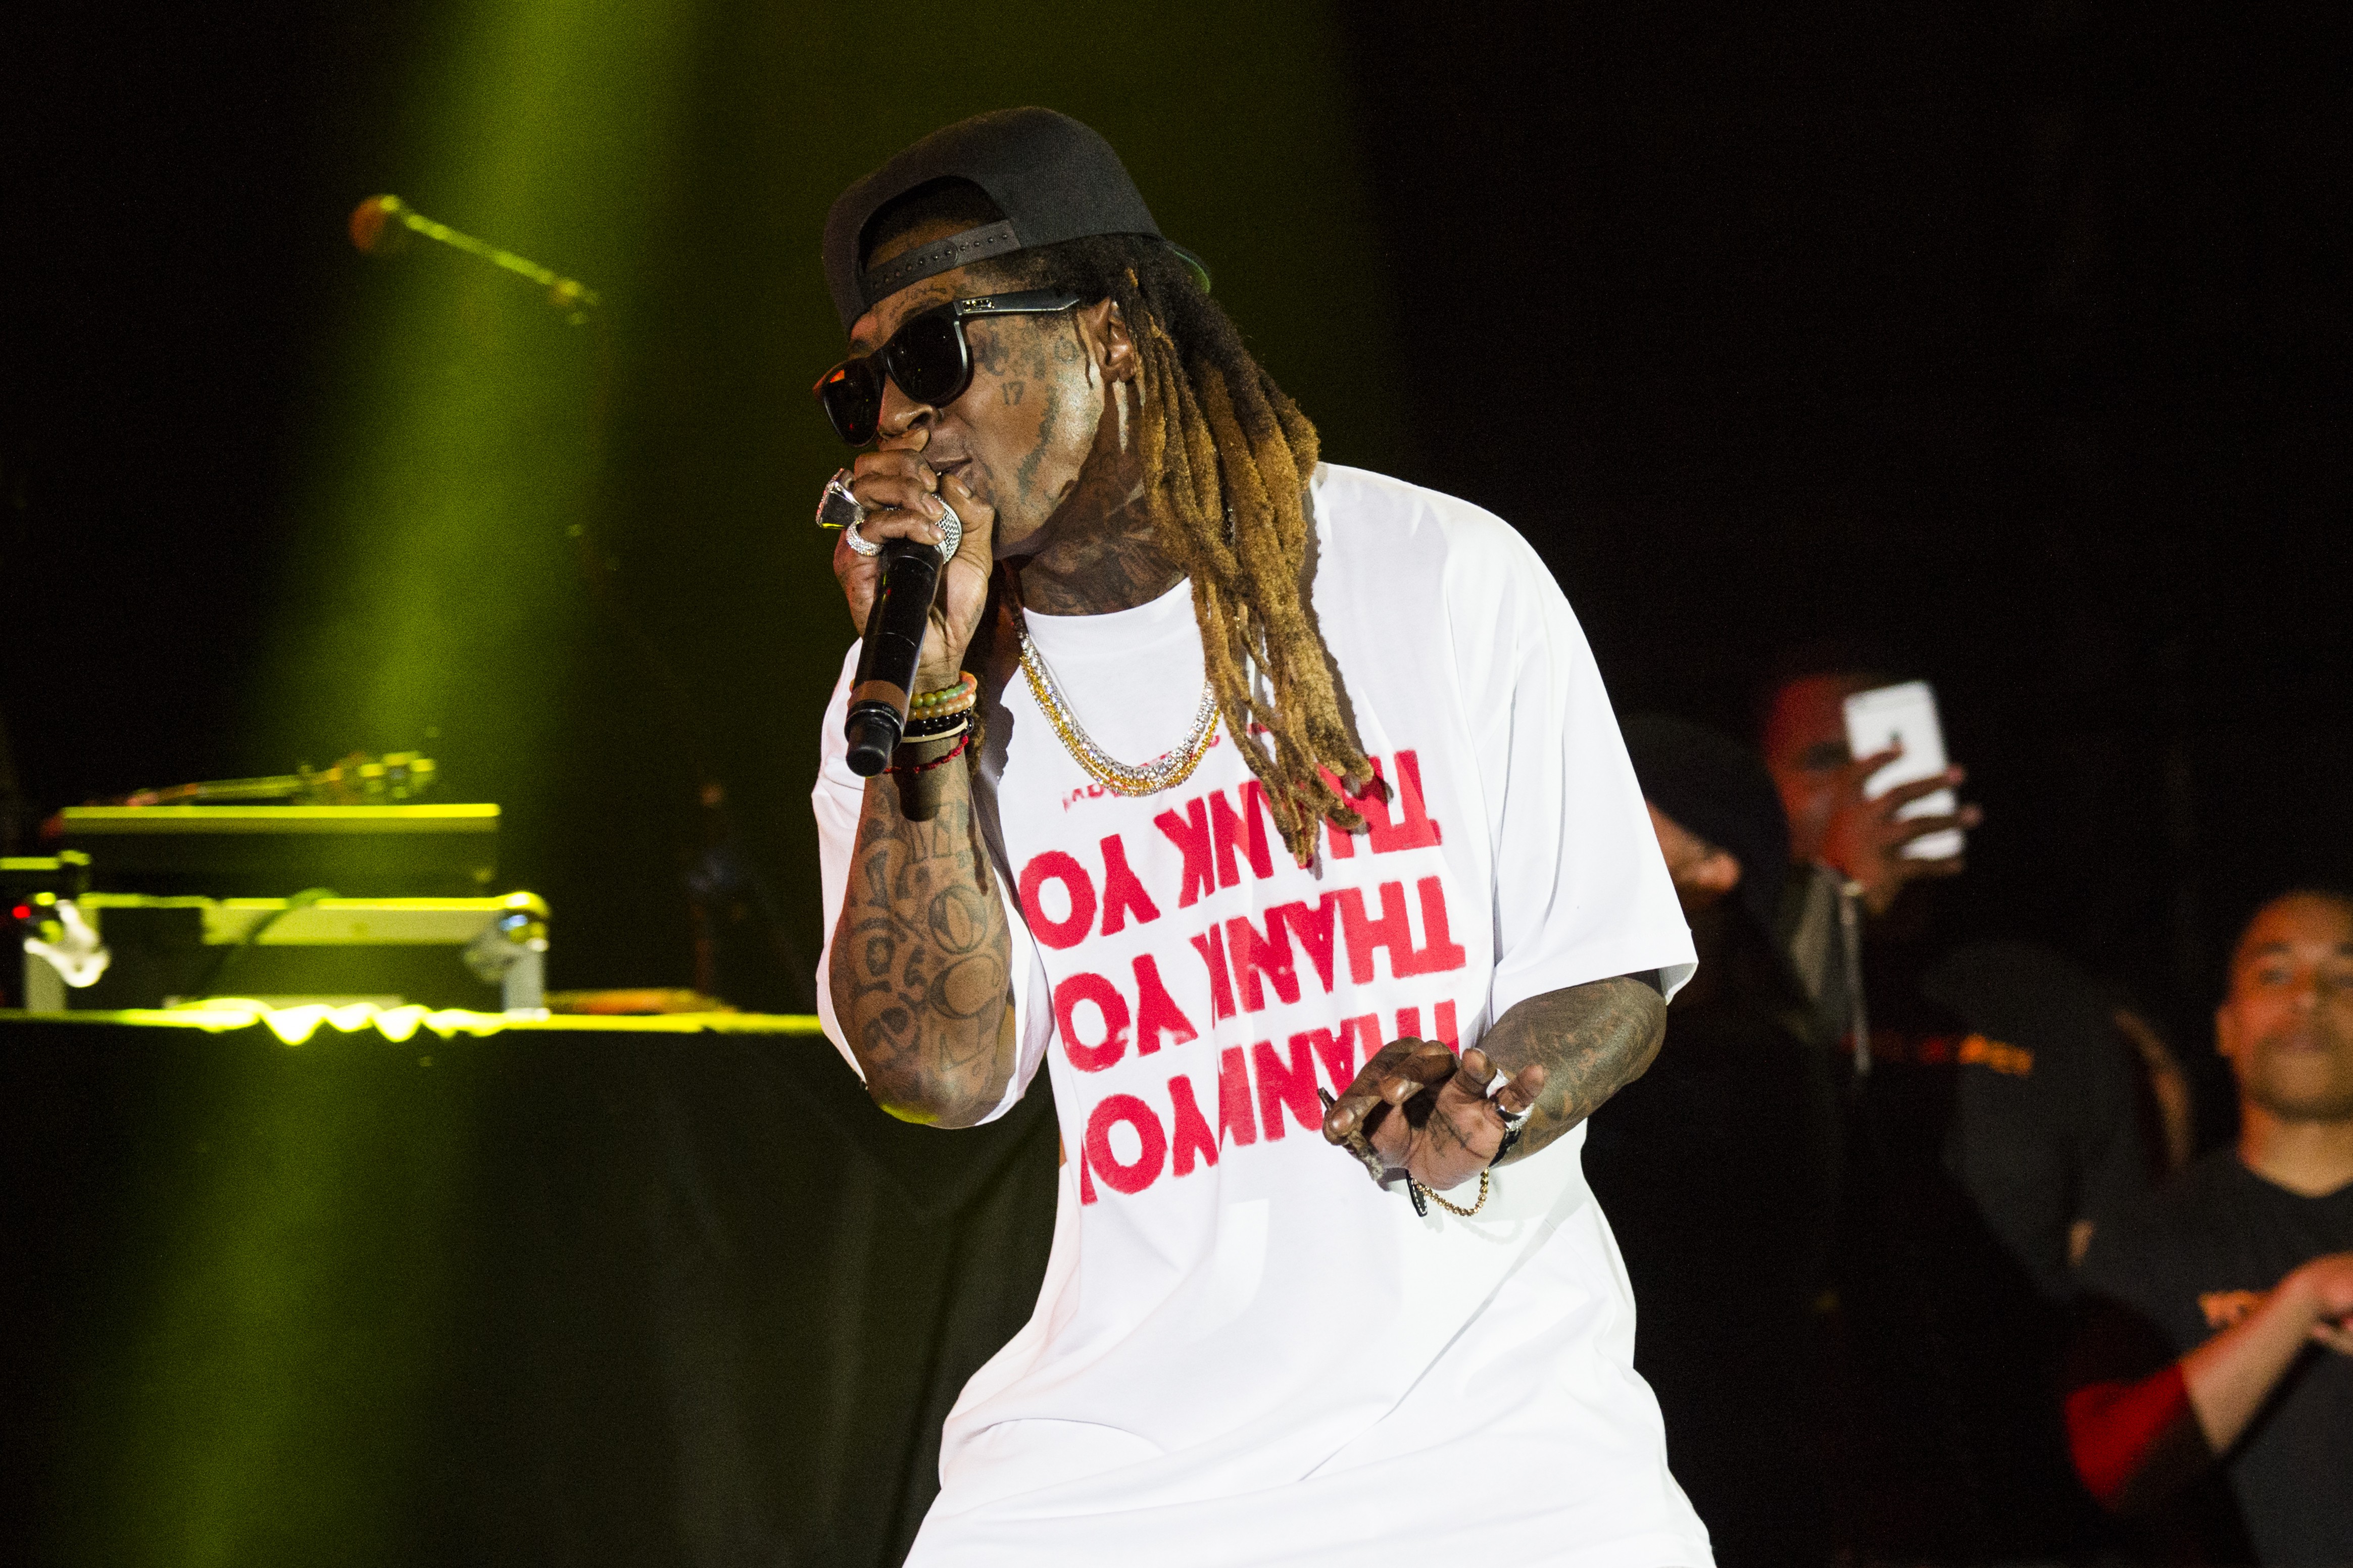 Lil Wayne Skips Concert After Refusing Security Check SPIN